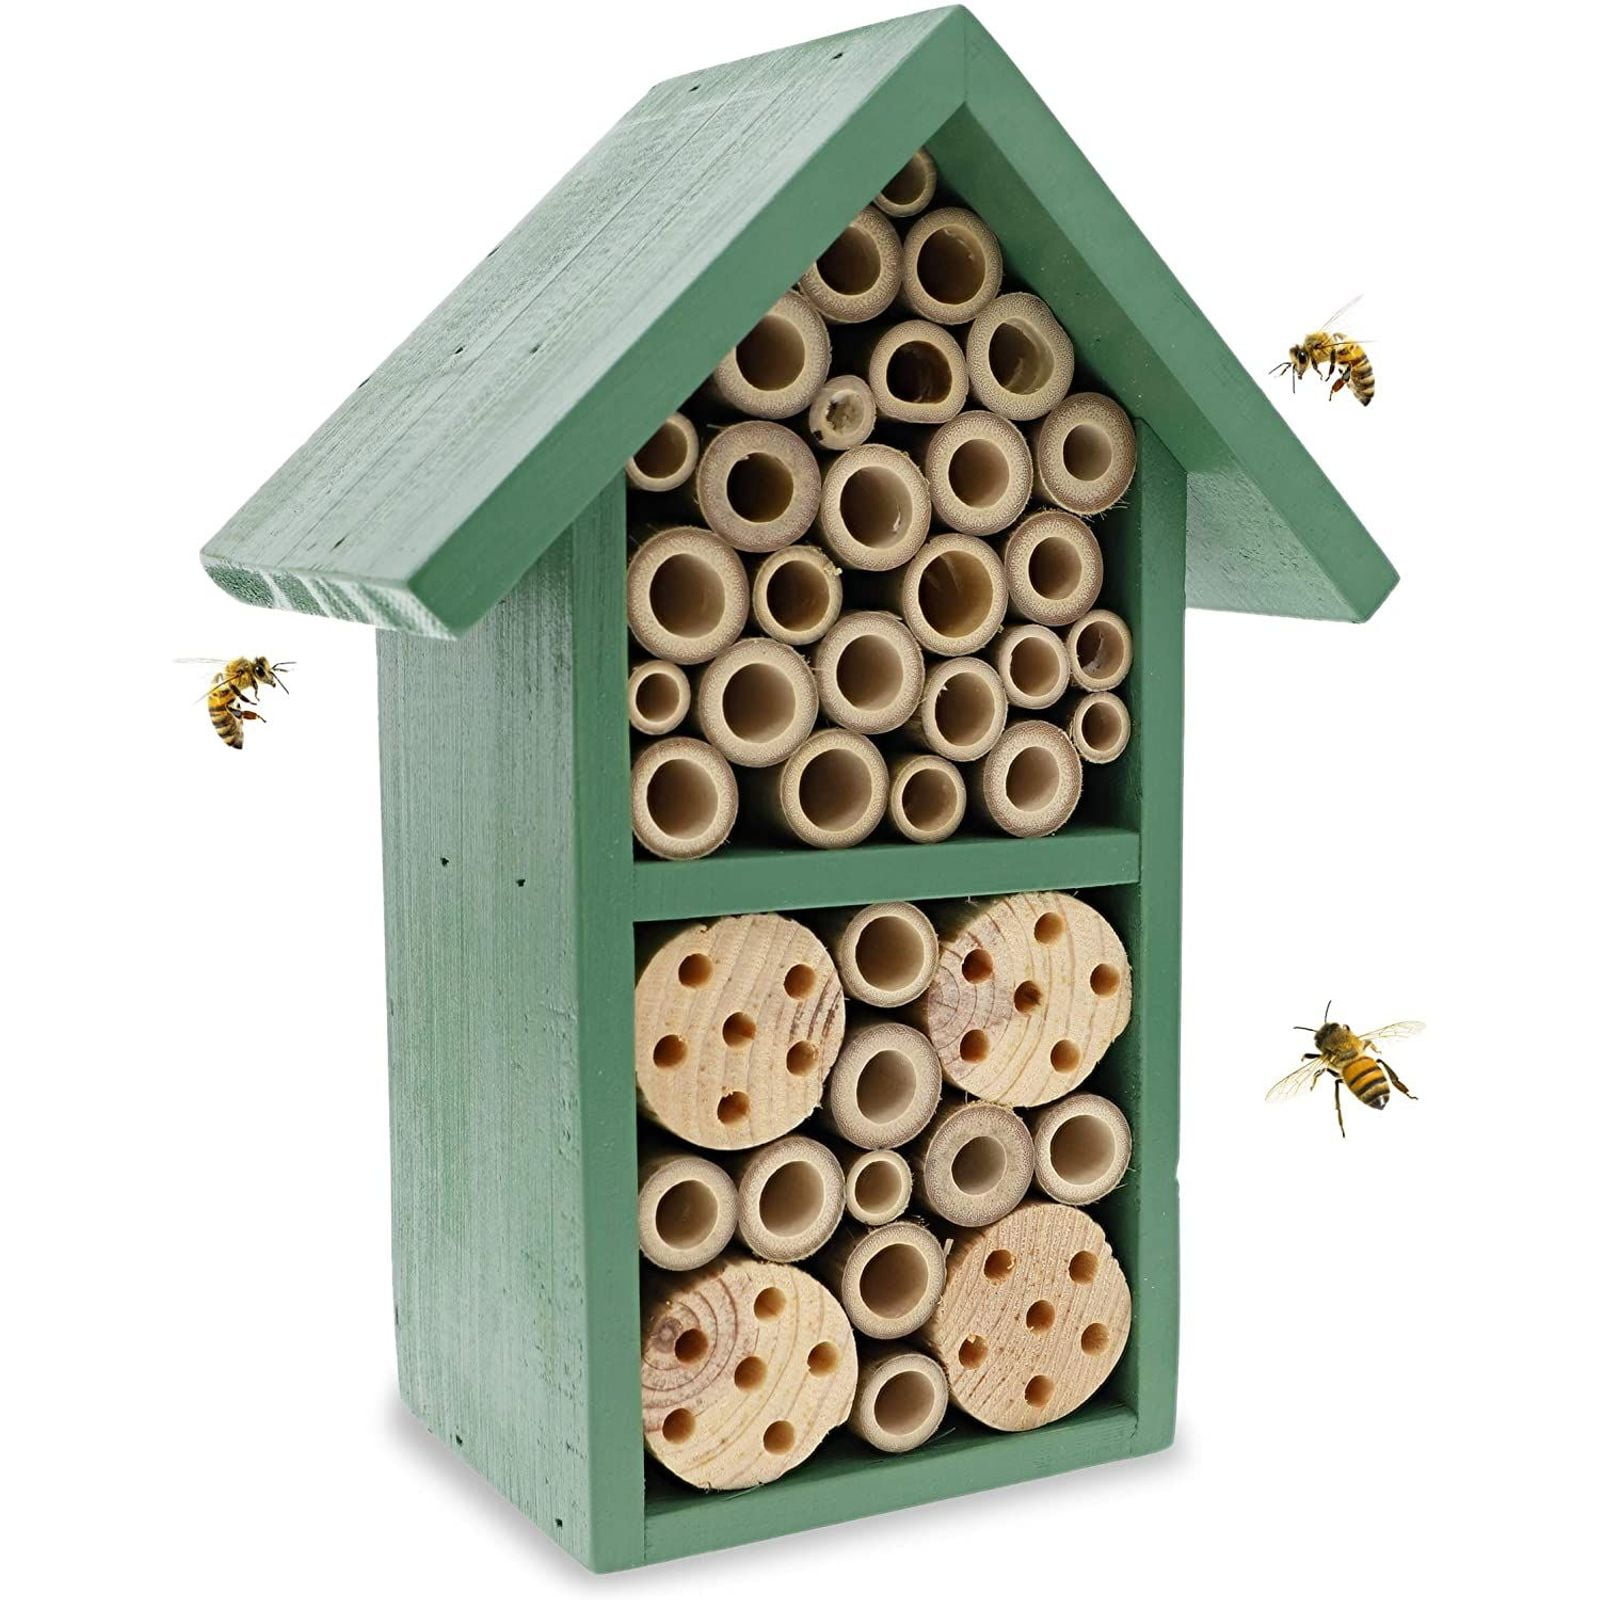 Handmade Natural Wooden Bee Hive Coated with Wax for Water-Proof and Long Service Life Attracts Peaceful Bee Pollinators to Enhance Your Gardens Productivity POLLIBEE Mason Bee House 